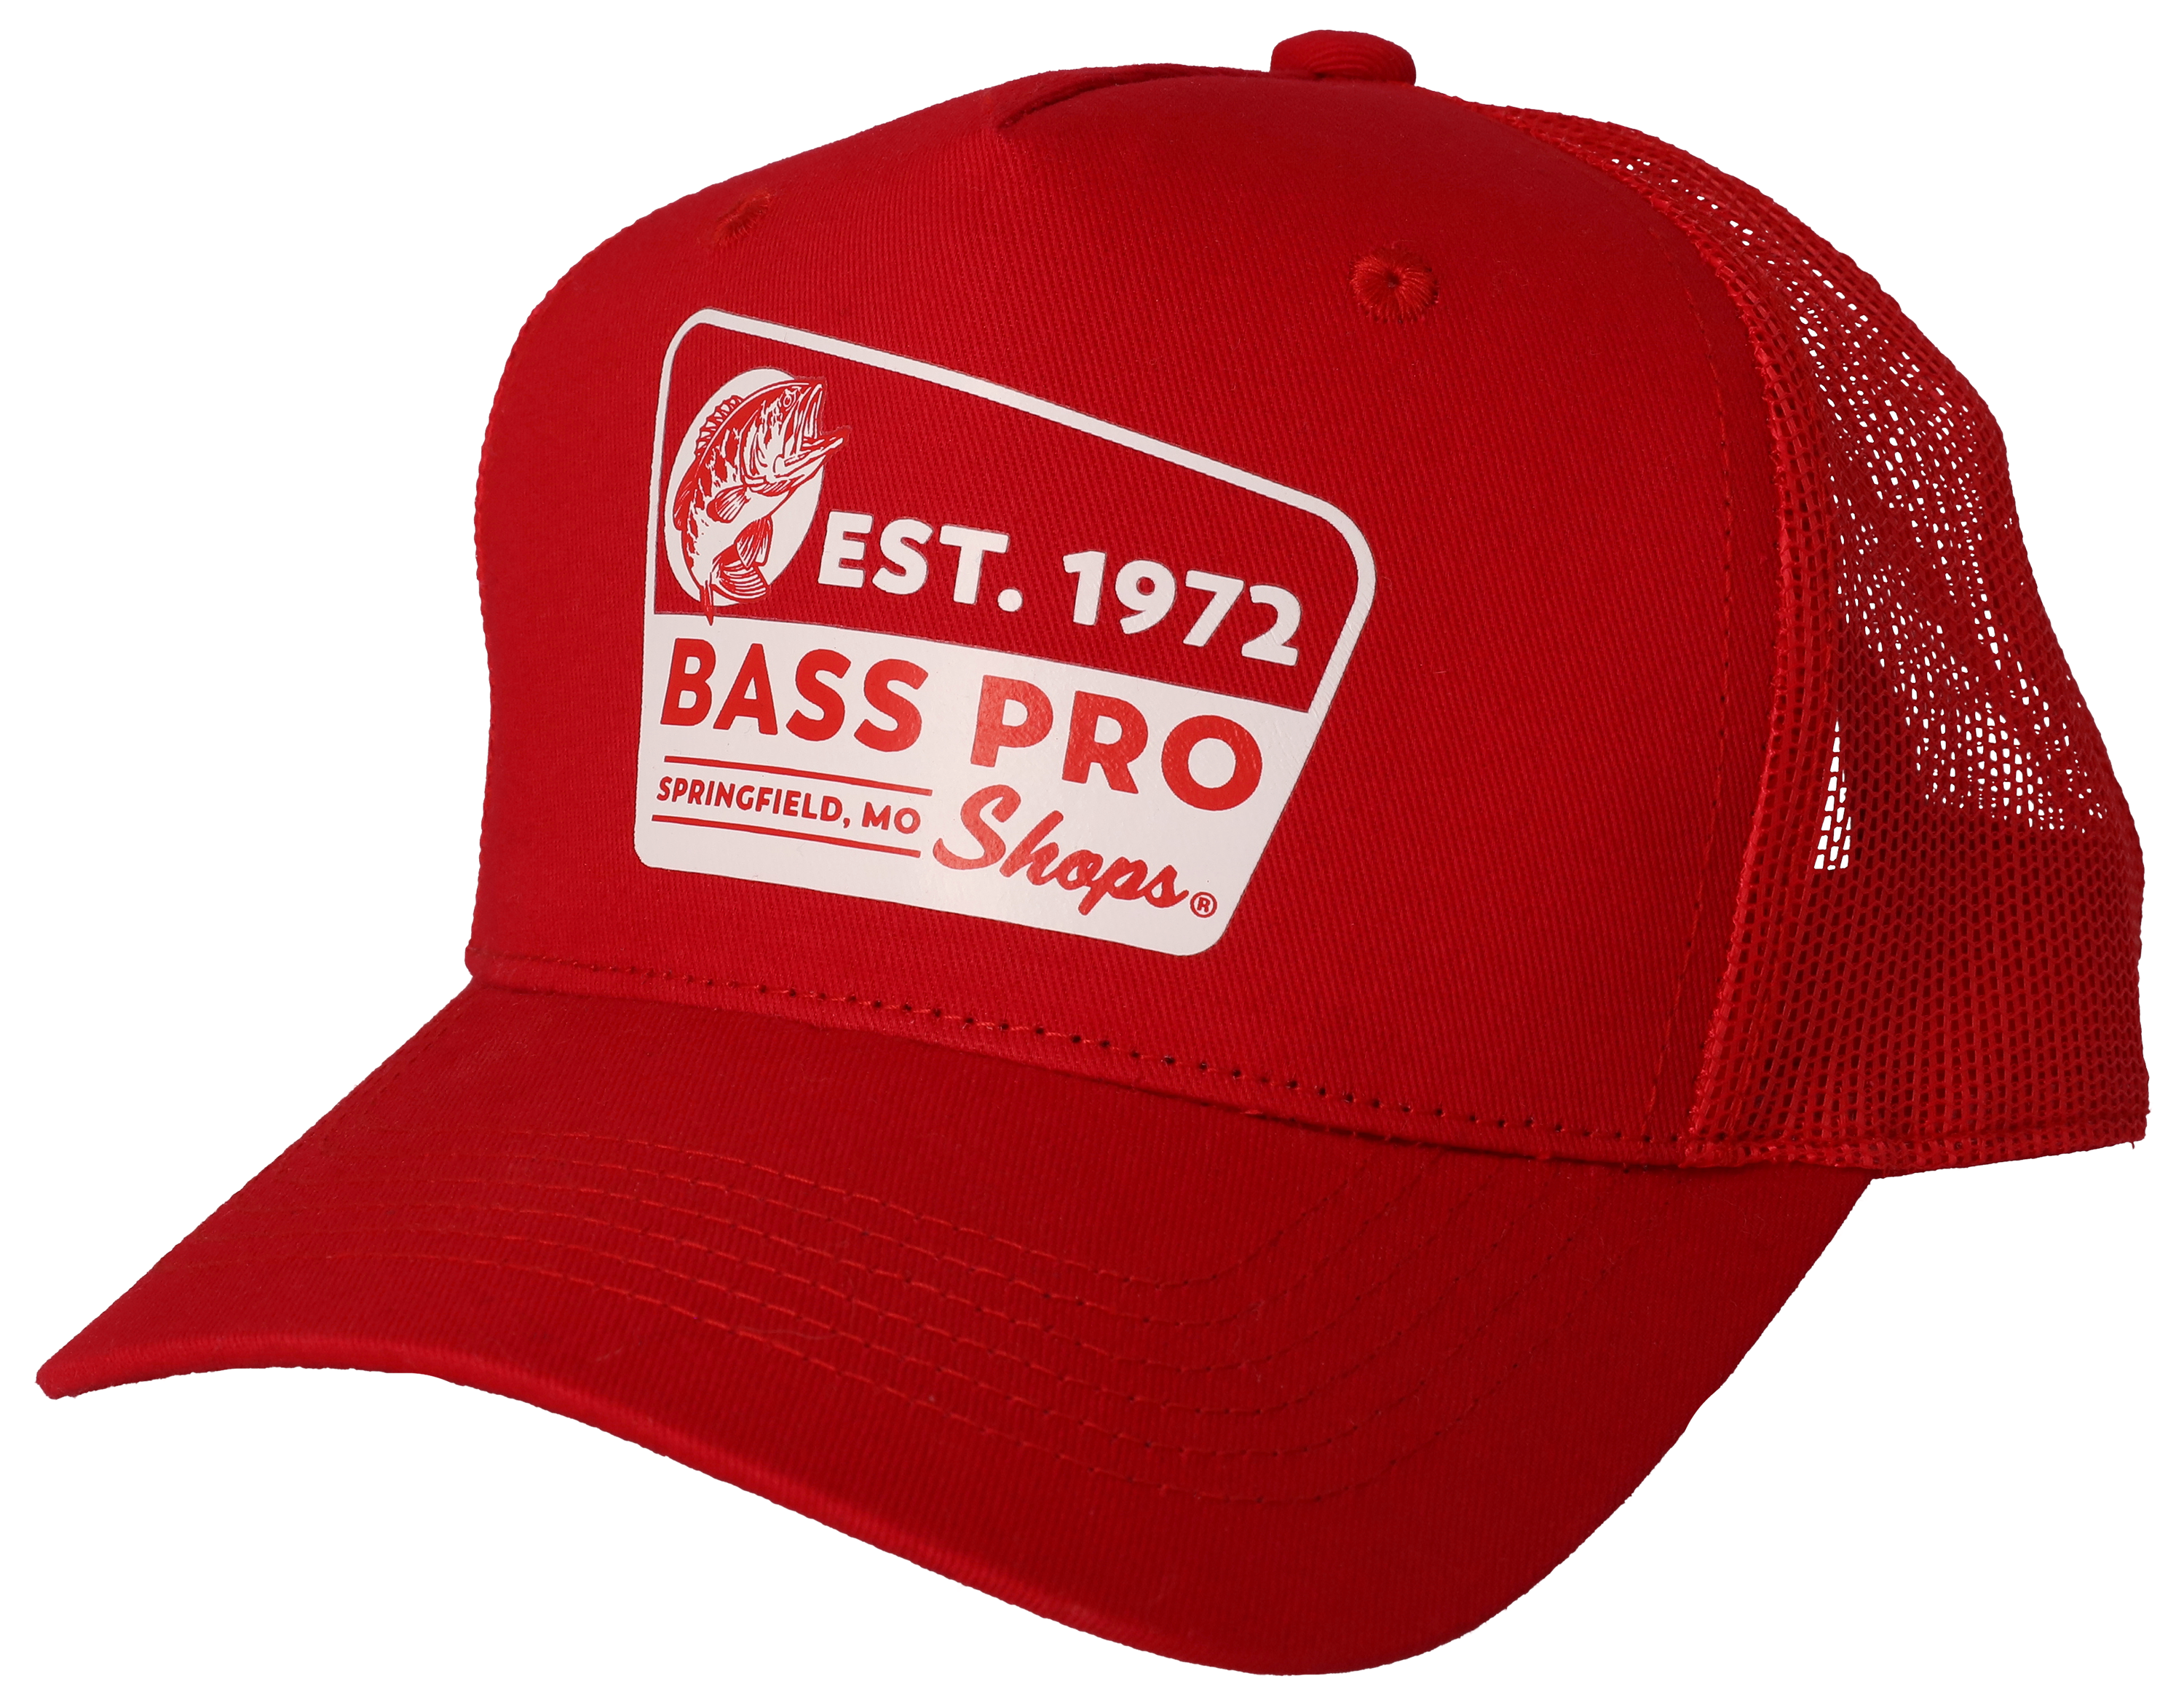 Cap off your day…and your new year with a shiny new Bass Pro logo cap!